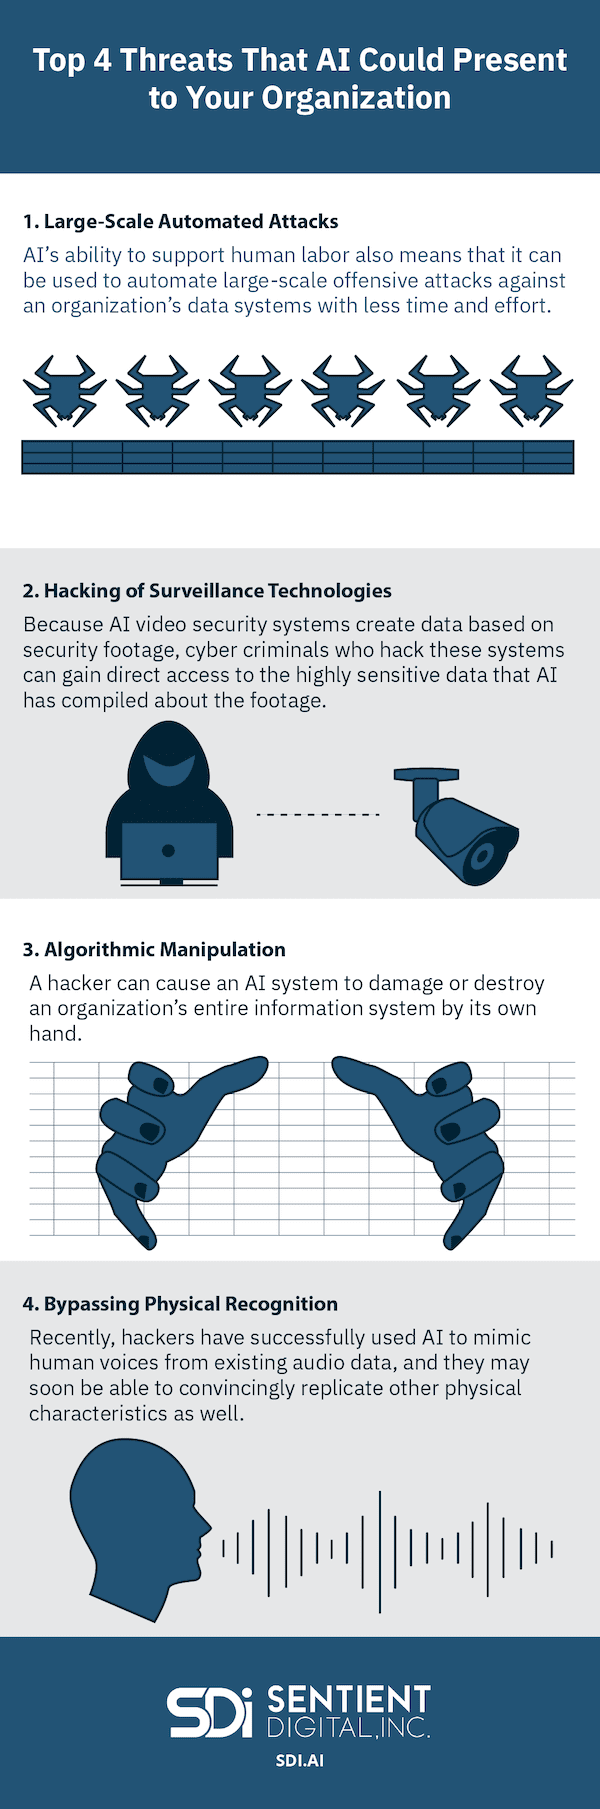 SDi graphic depicting threats from AI